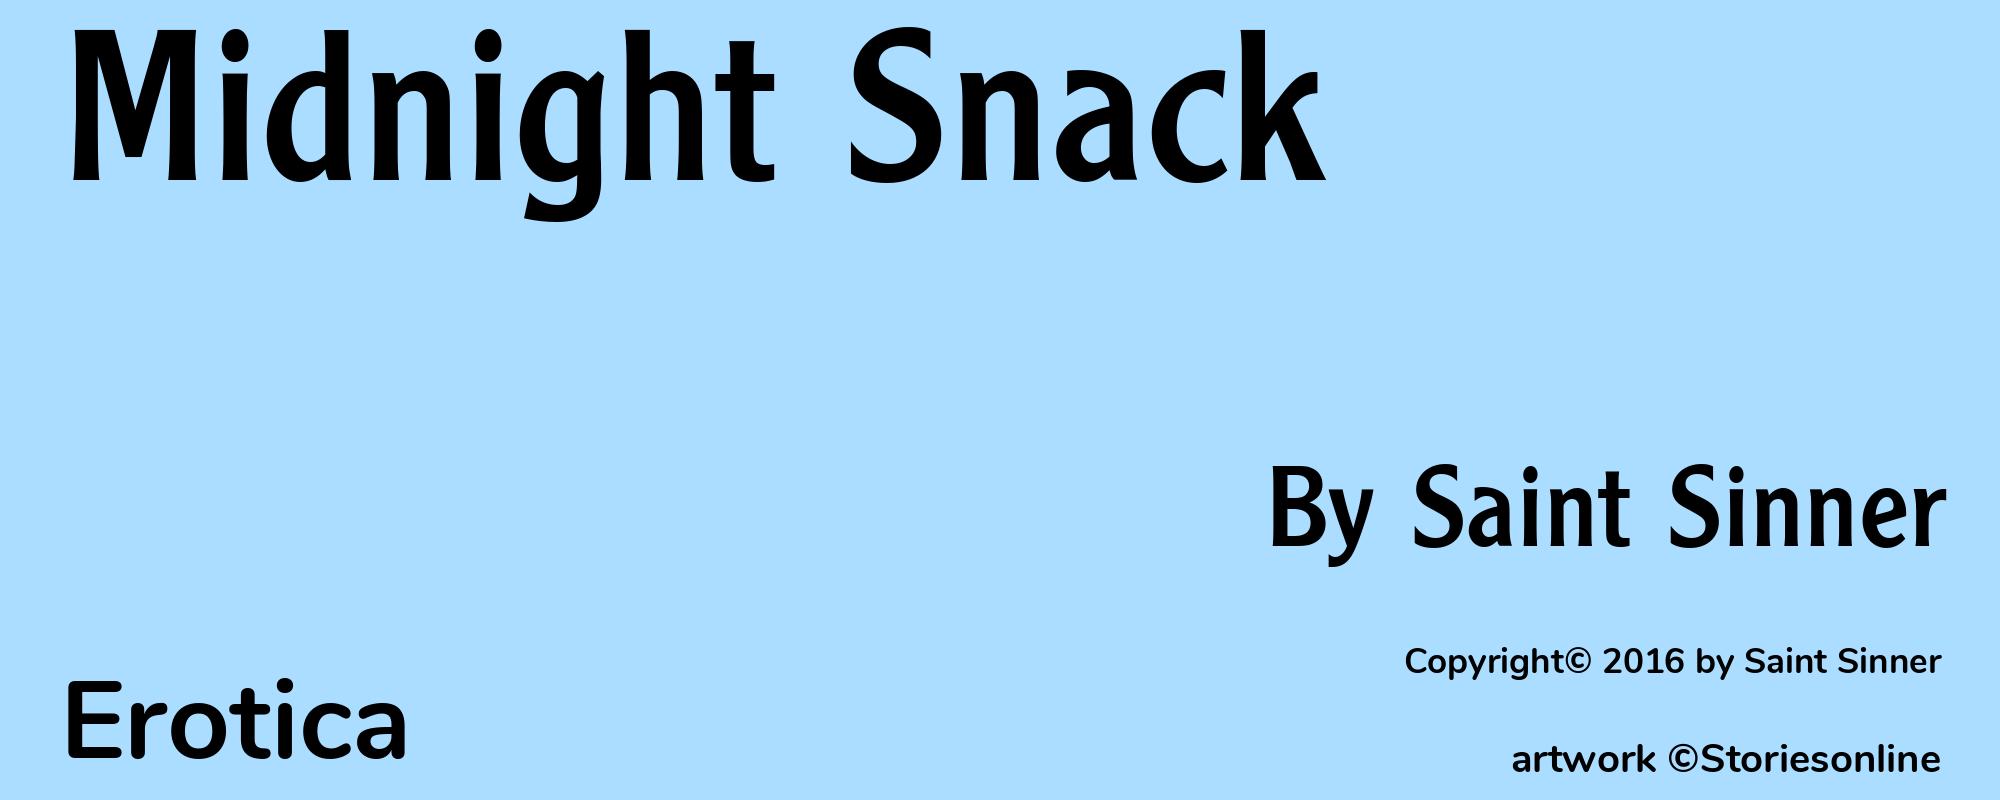 Midnight Snack - Cover